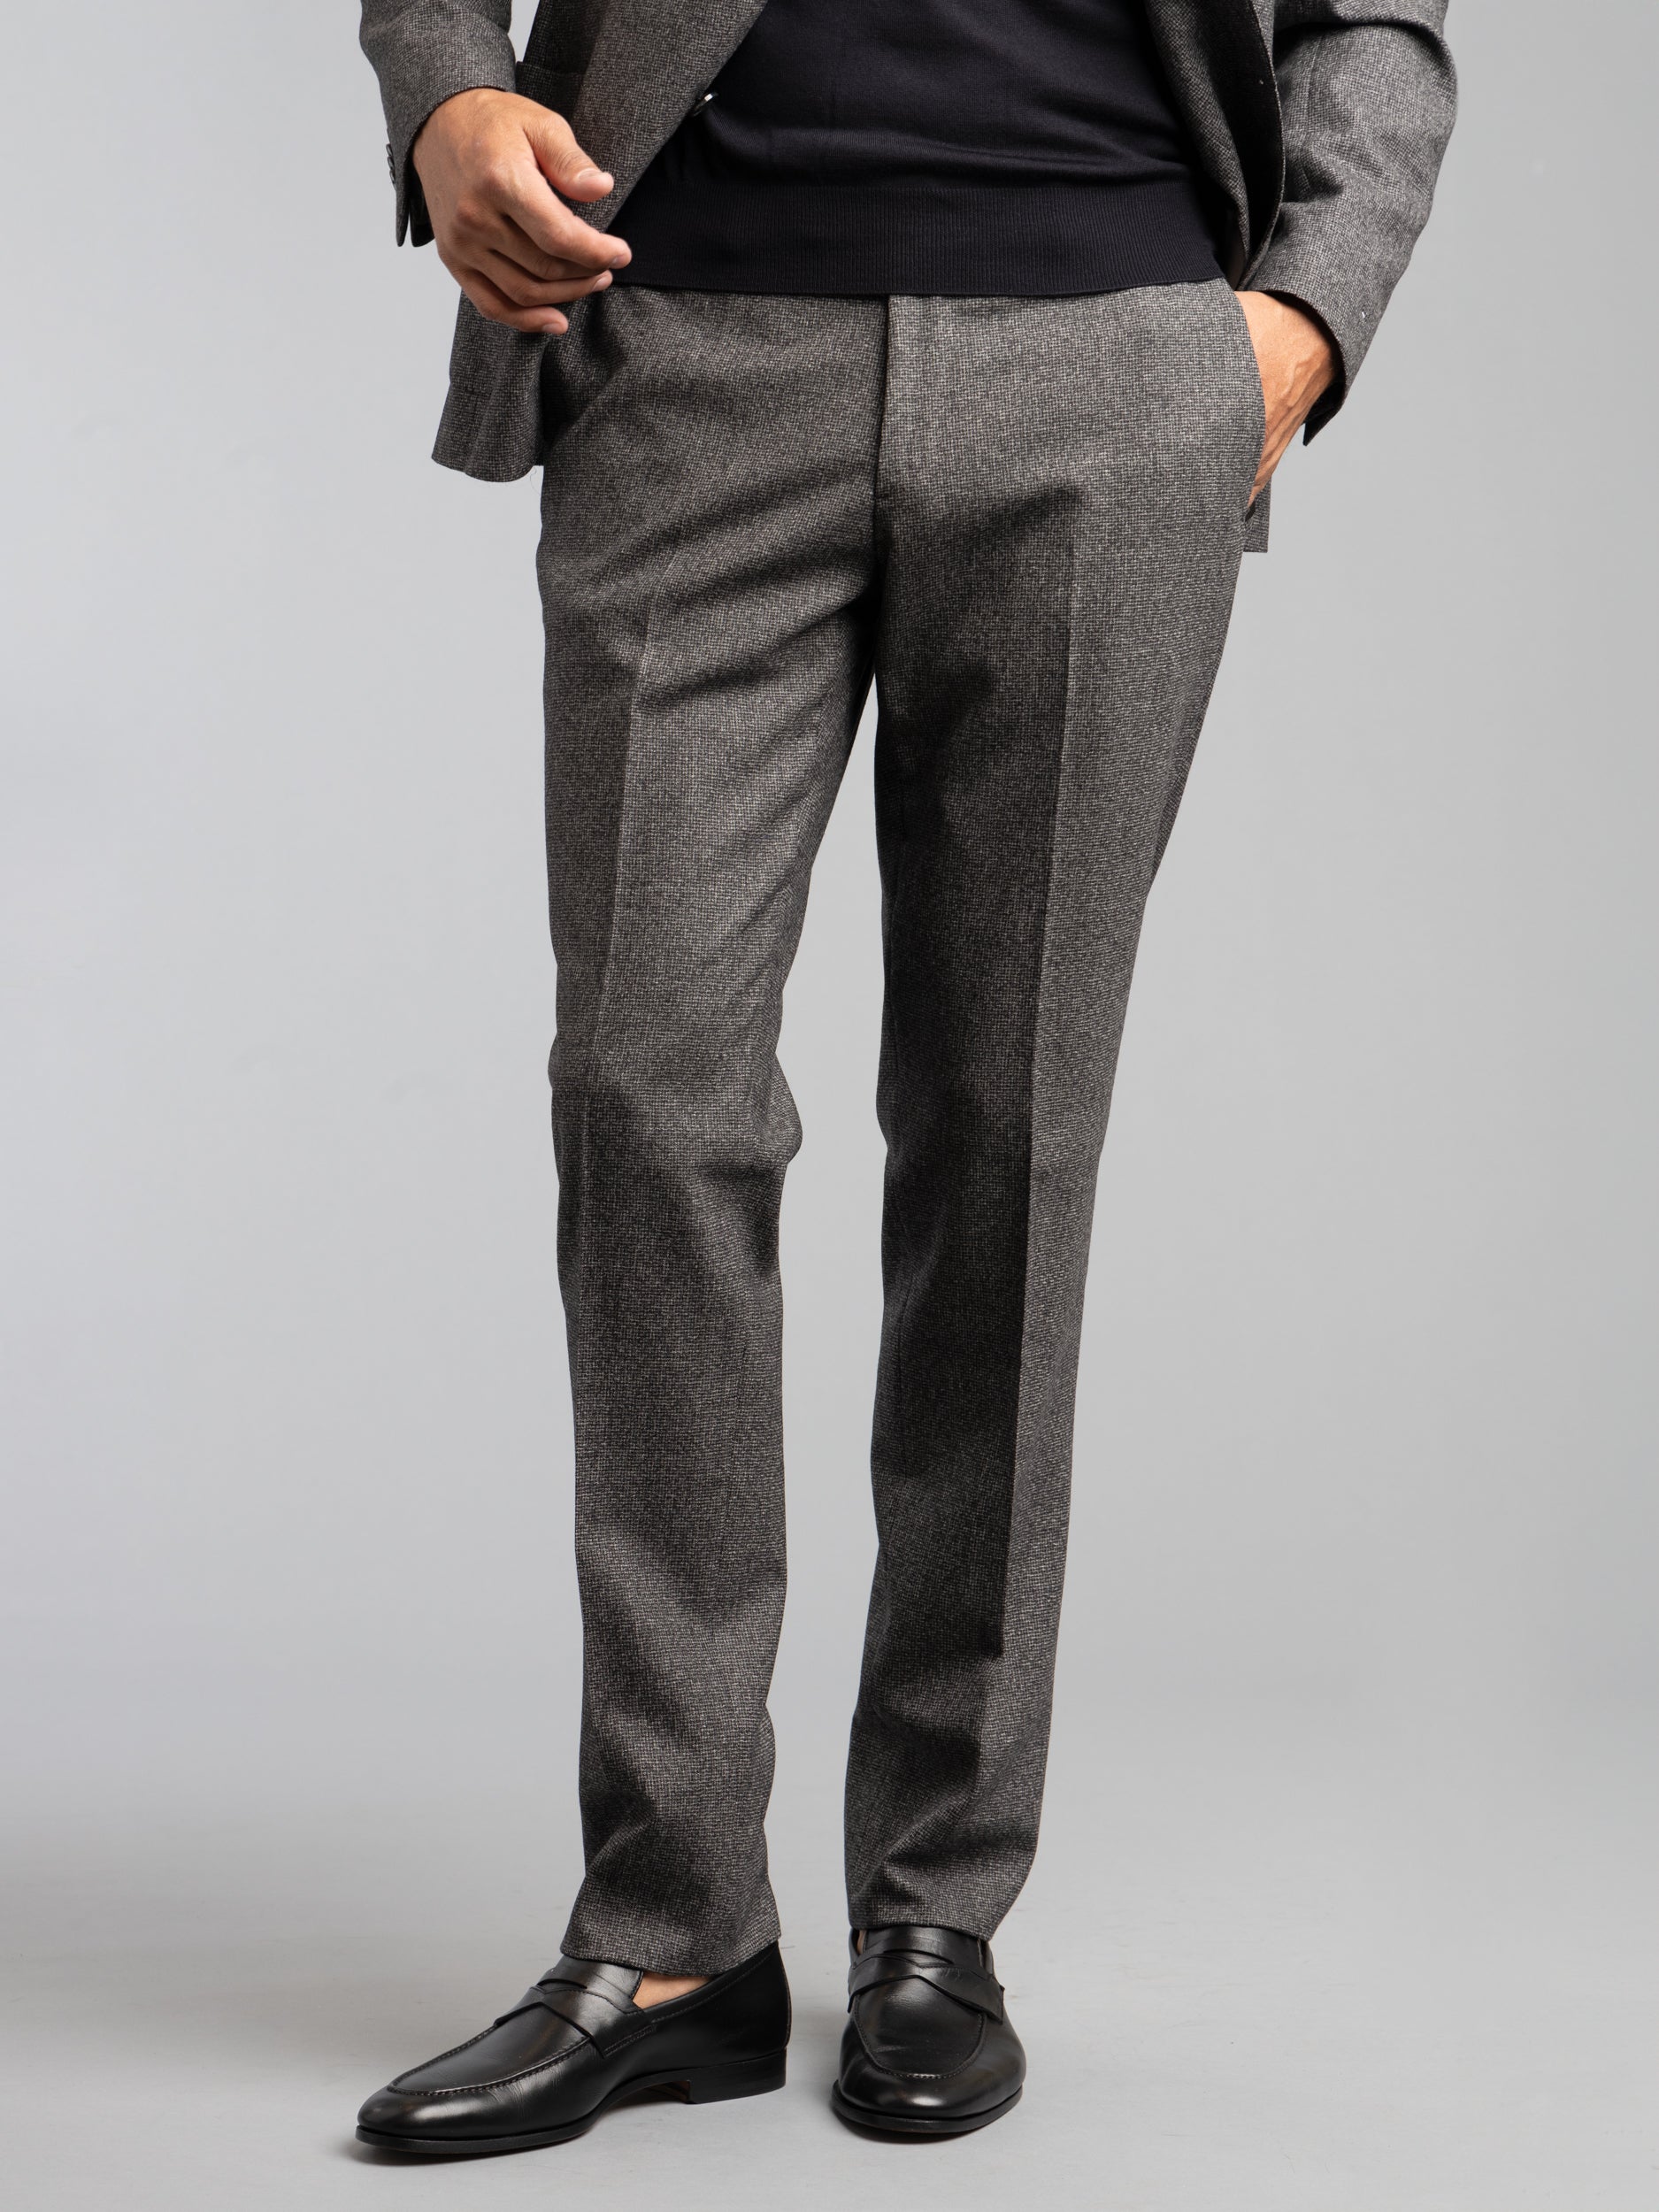 Grey Glen Check Wool Suit – The Helm Clothing